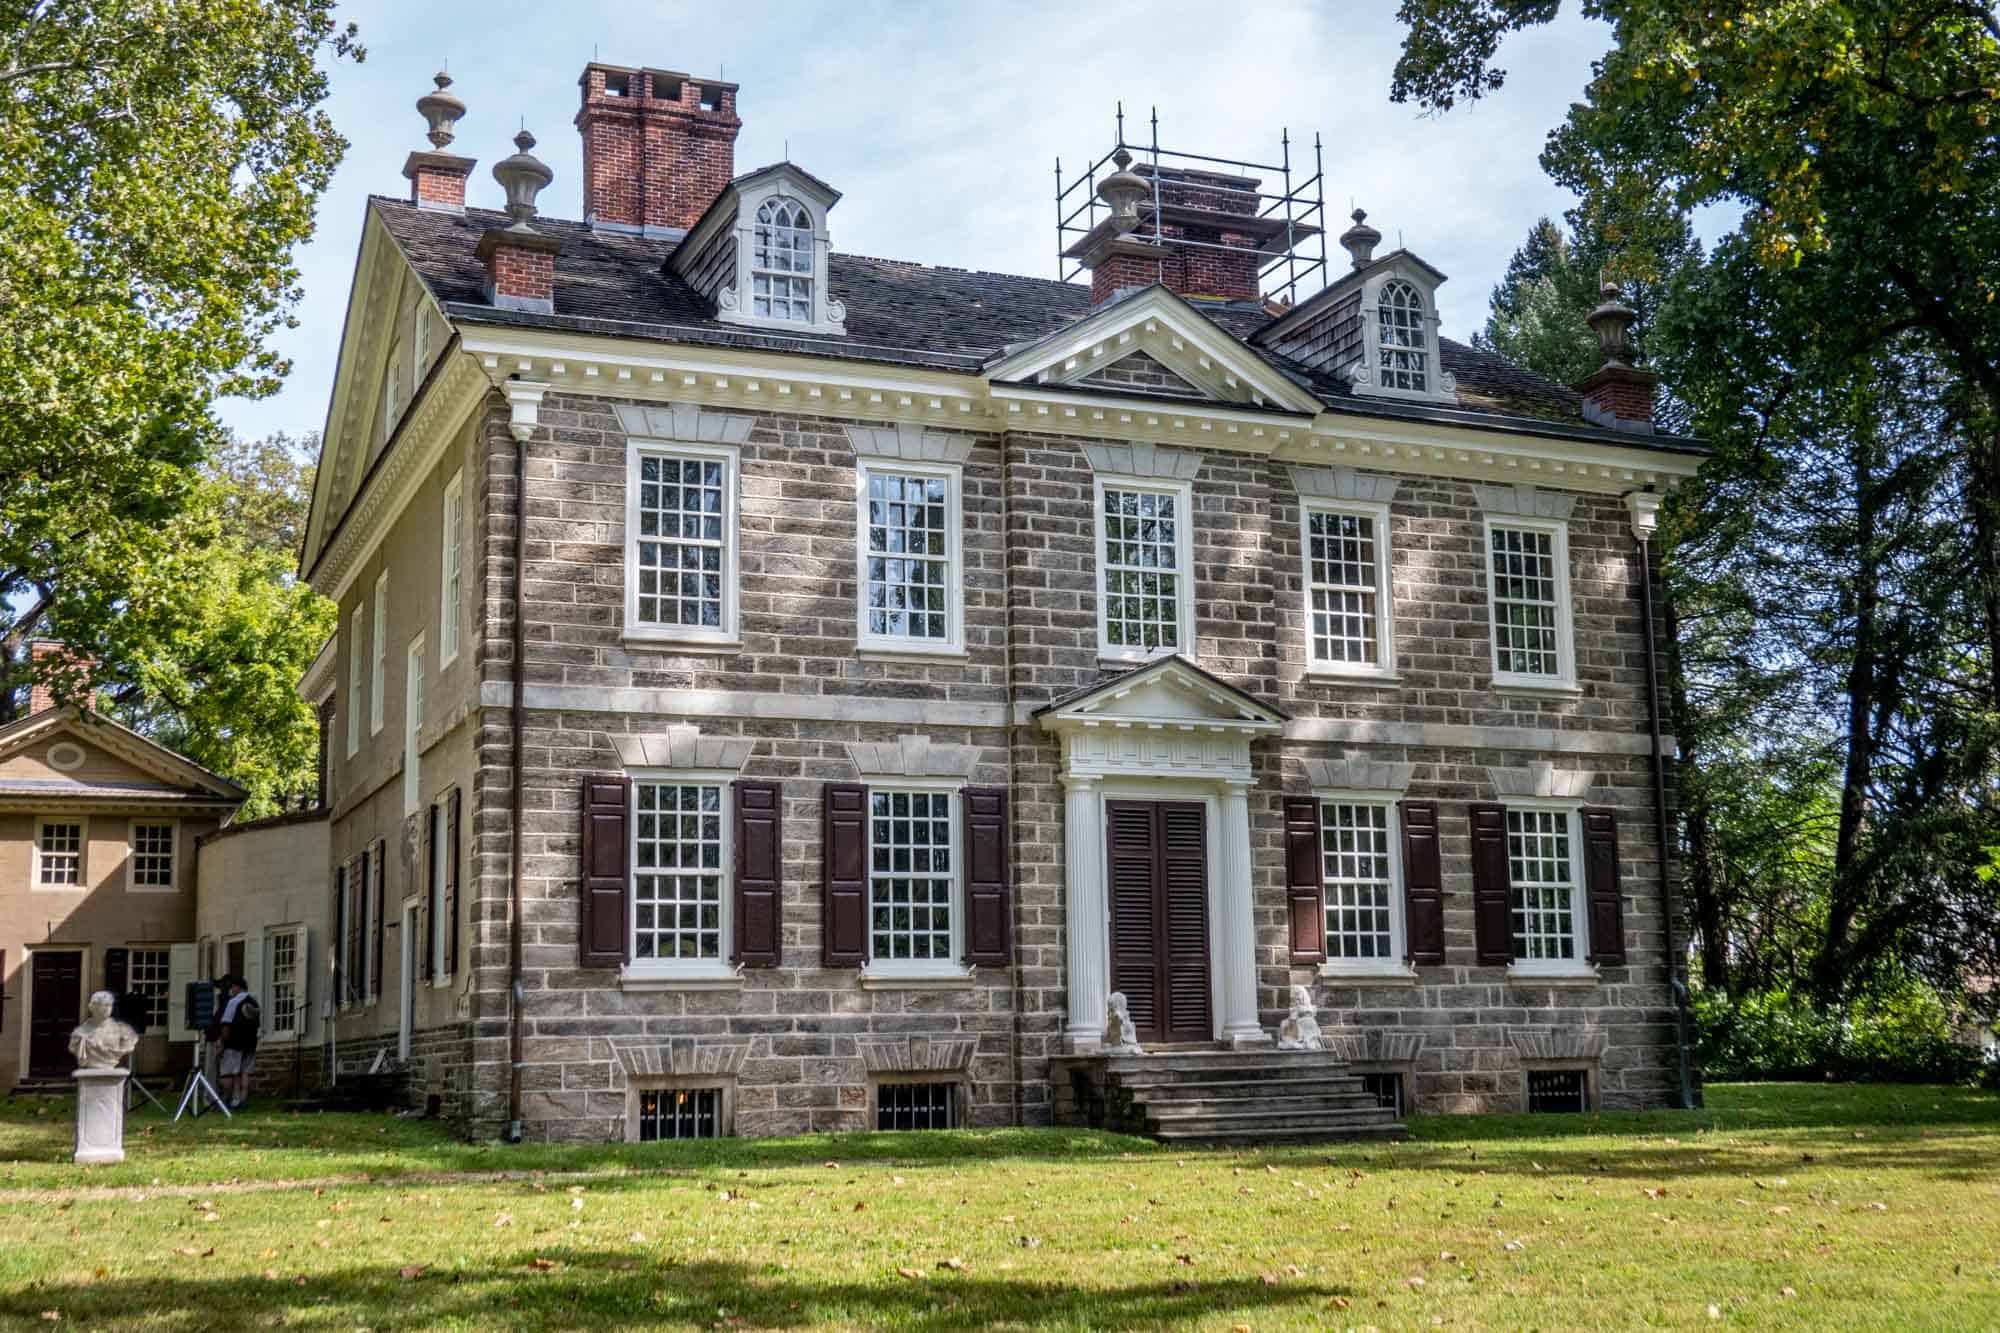 Two-story historic stone house with lots of windows.